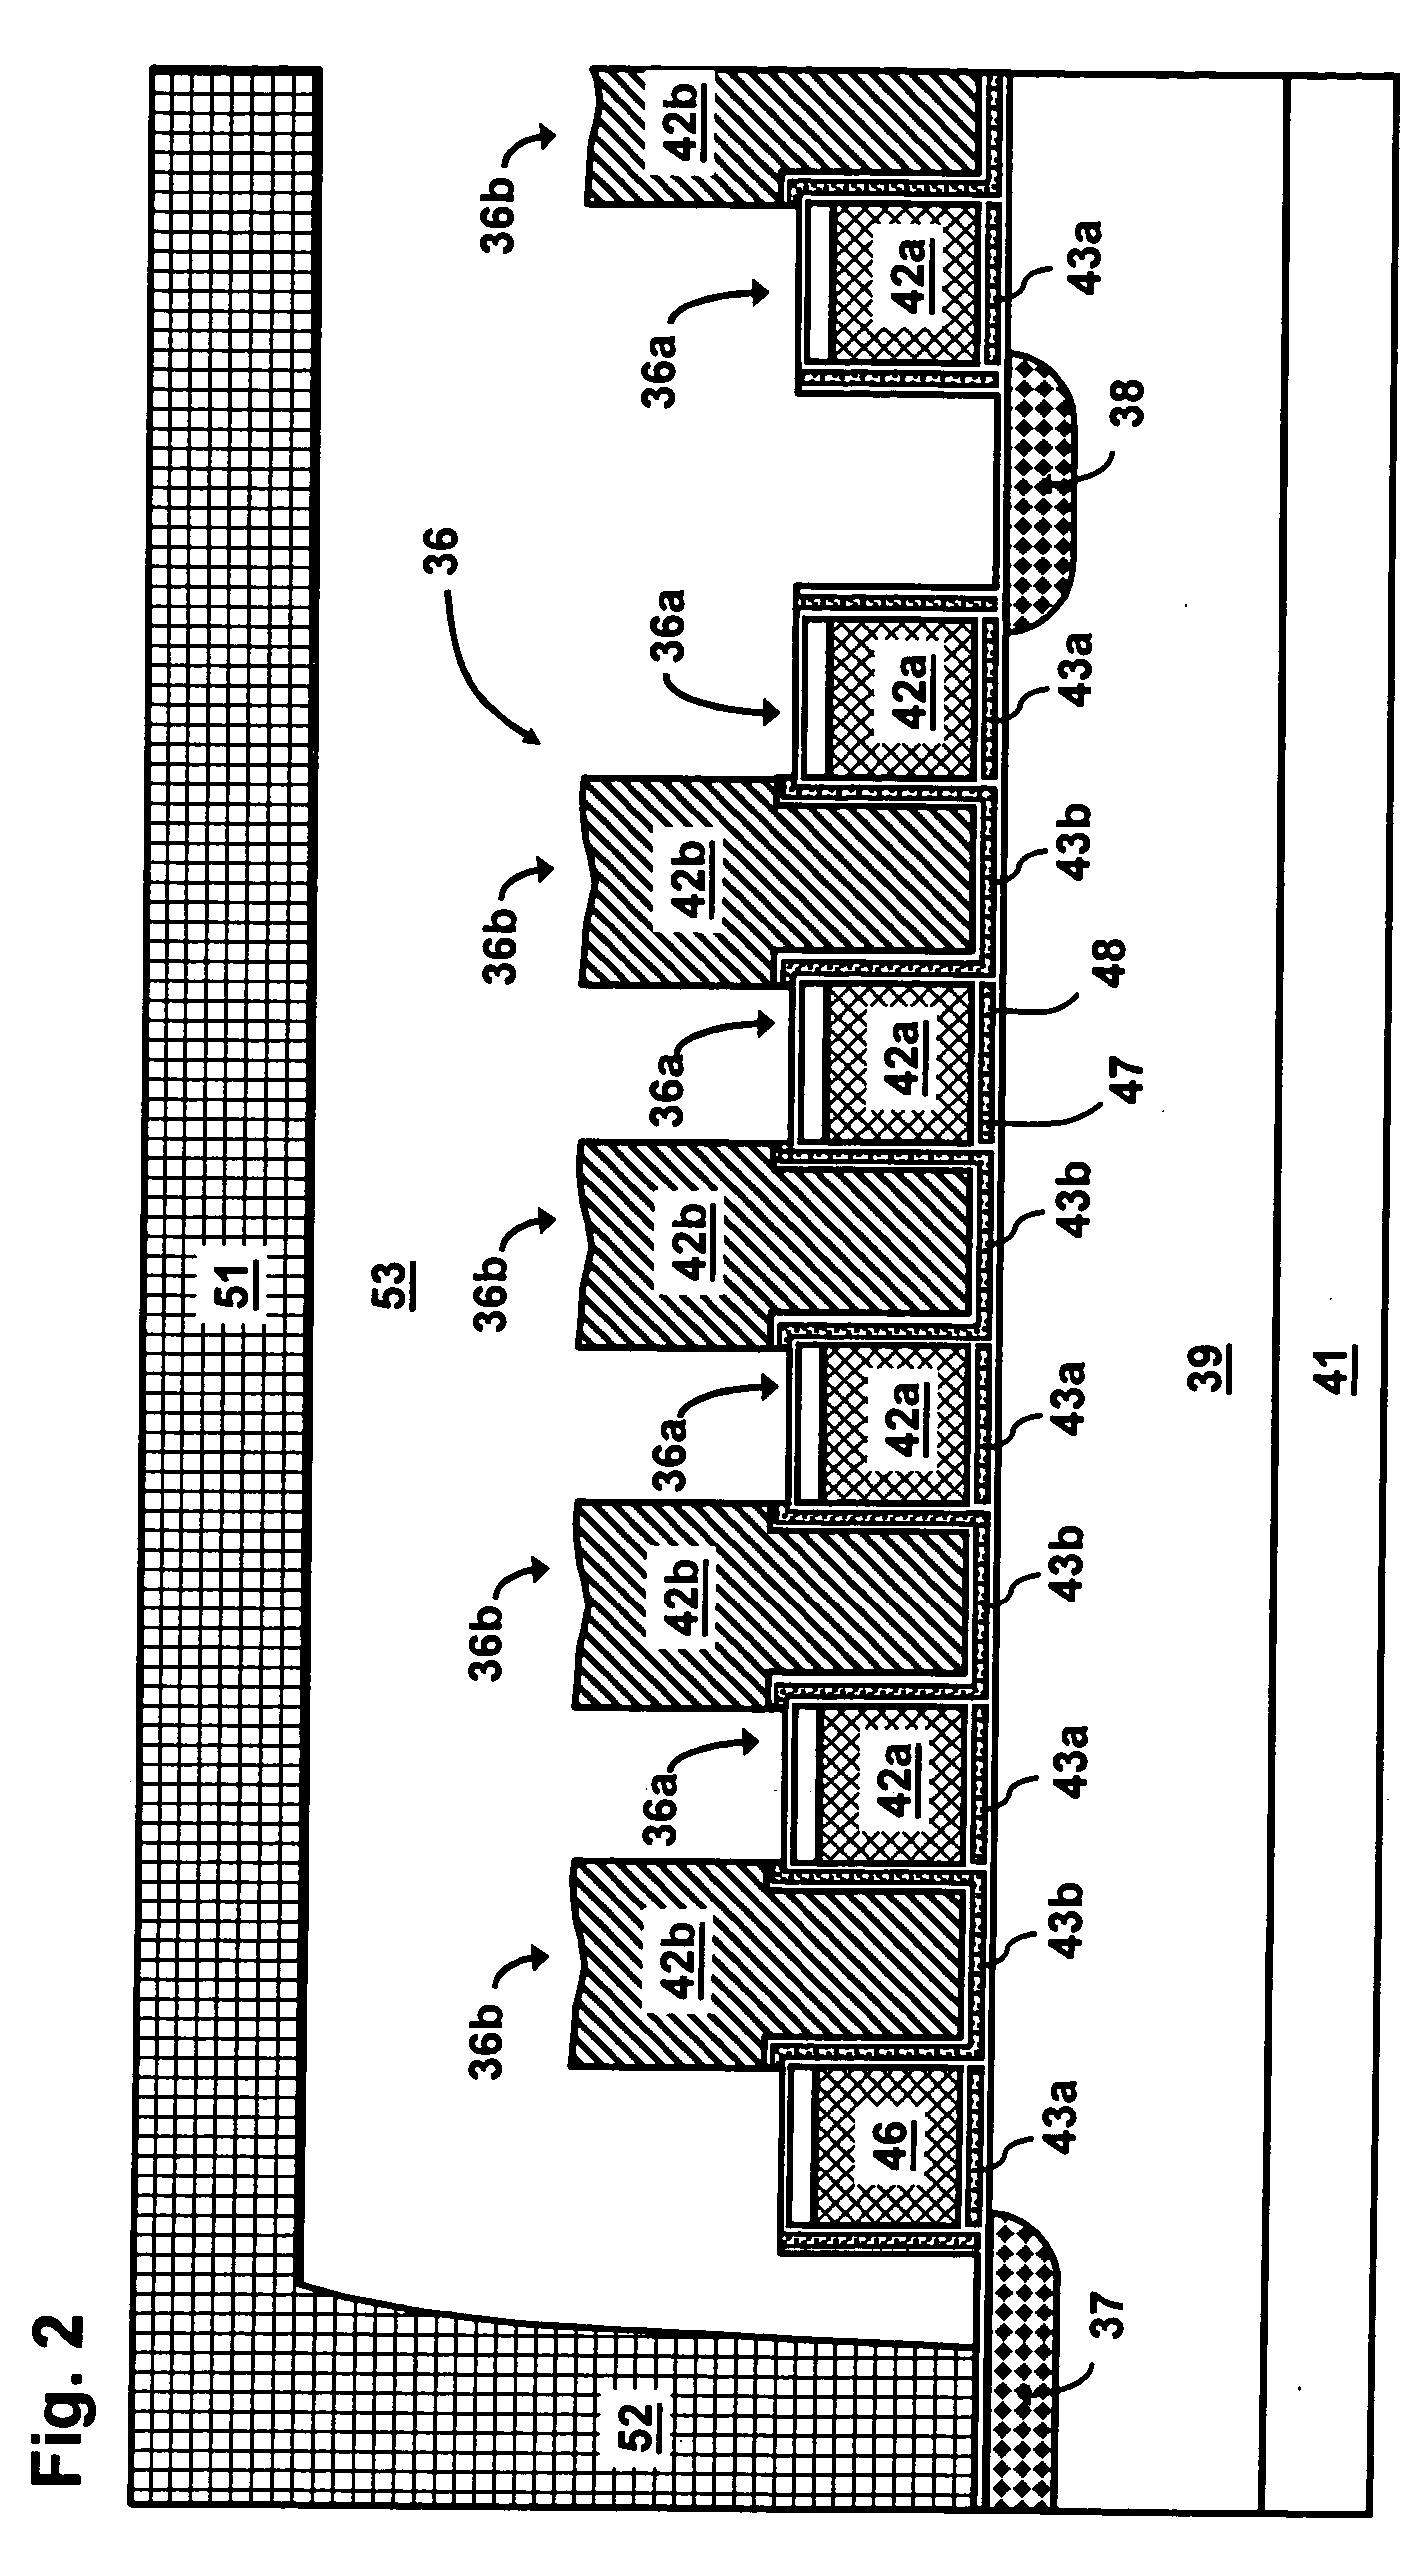 NAND flash memory with densely packed memory gates and fabrication process